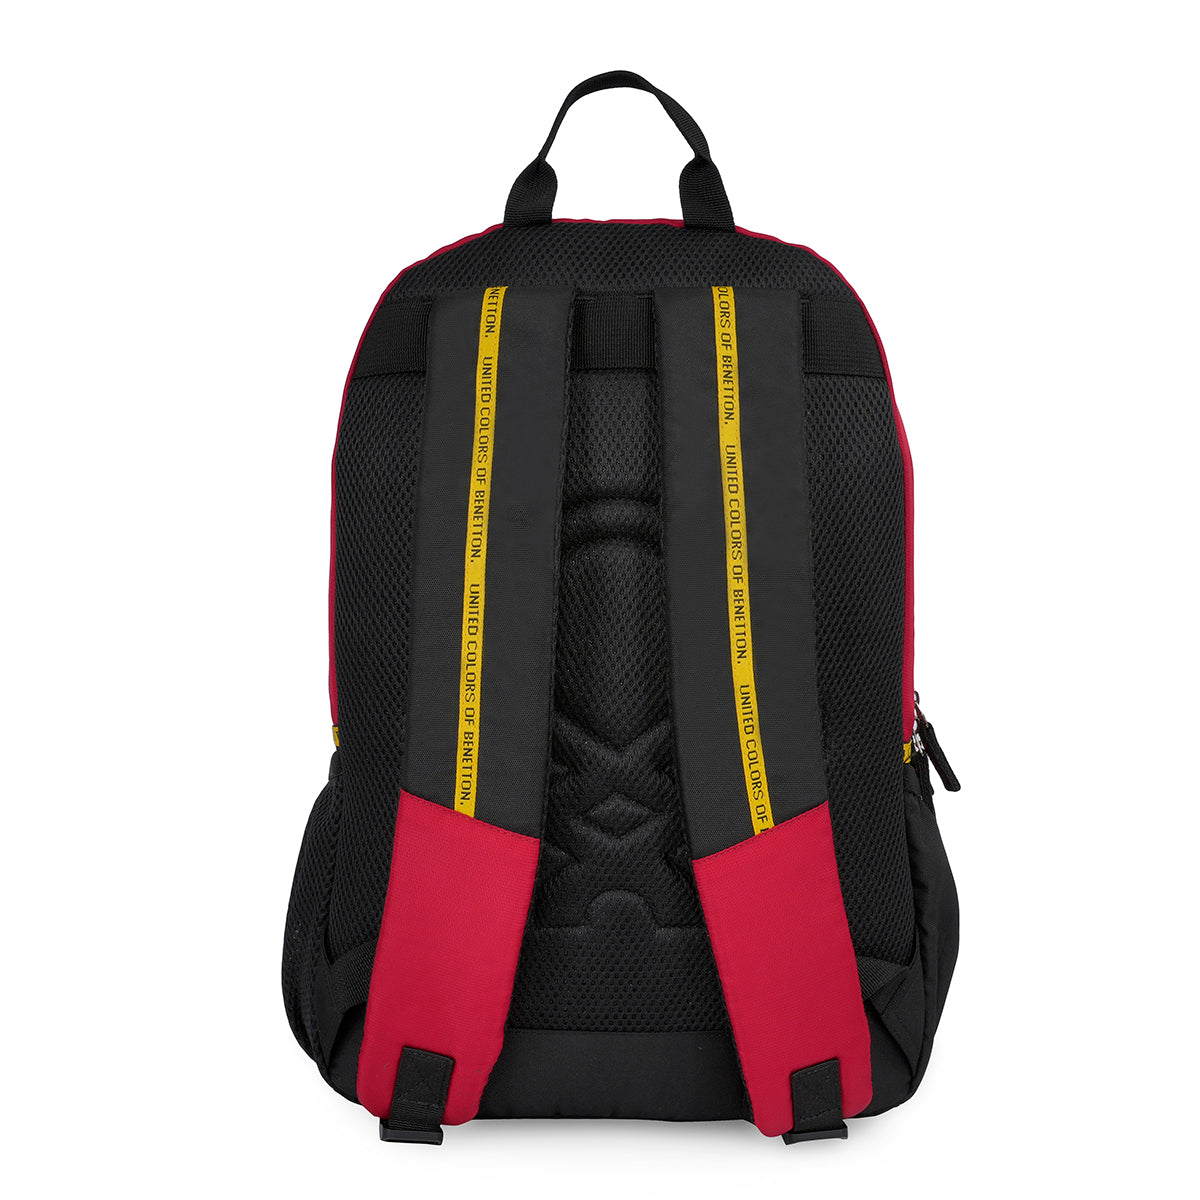 United Colors of Benetton Cairate Laptop Backpack Red